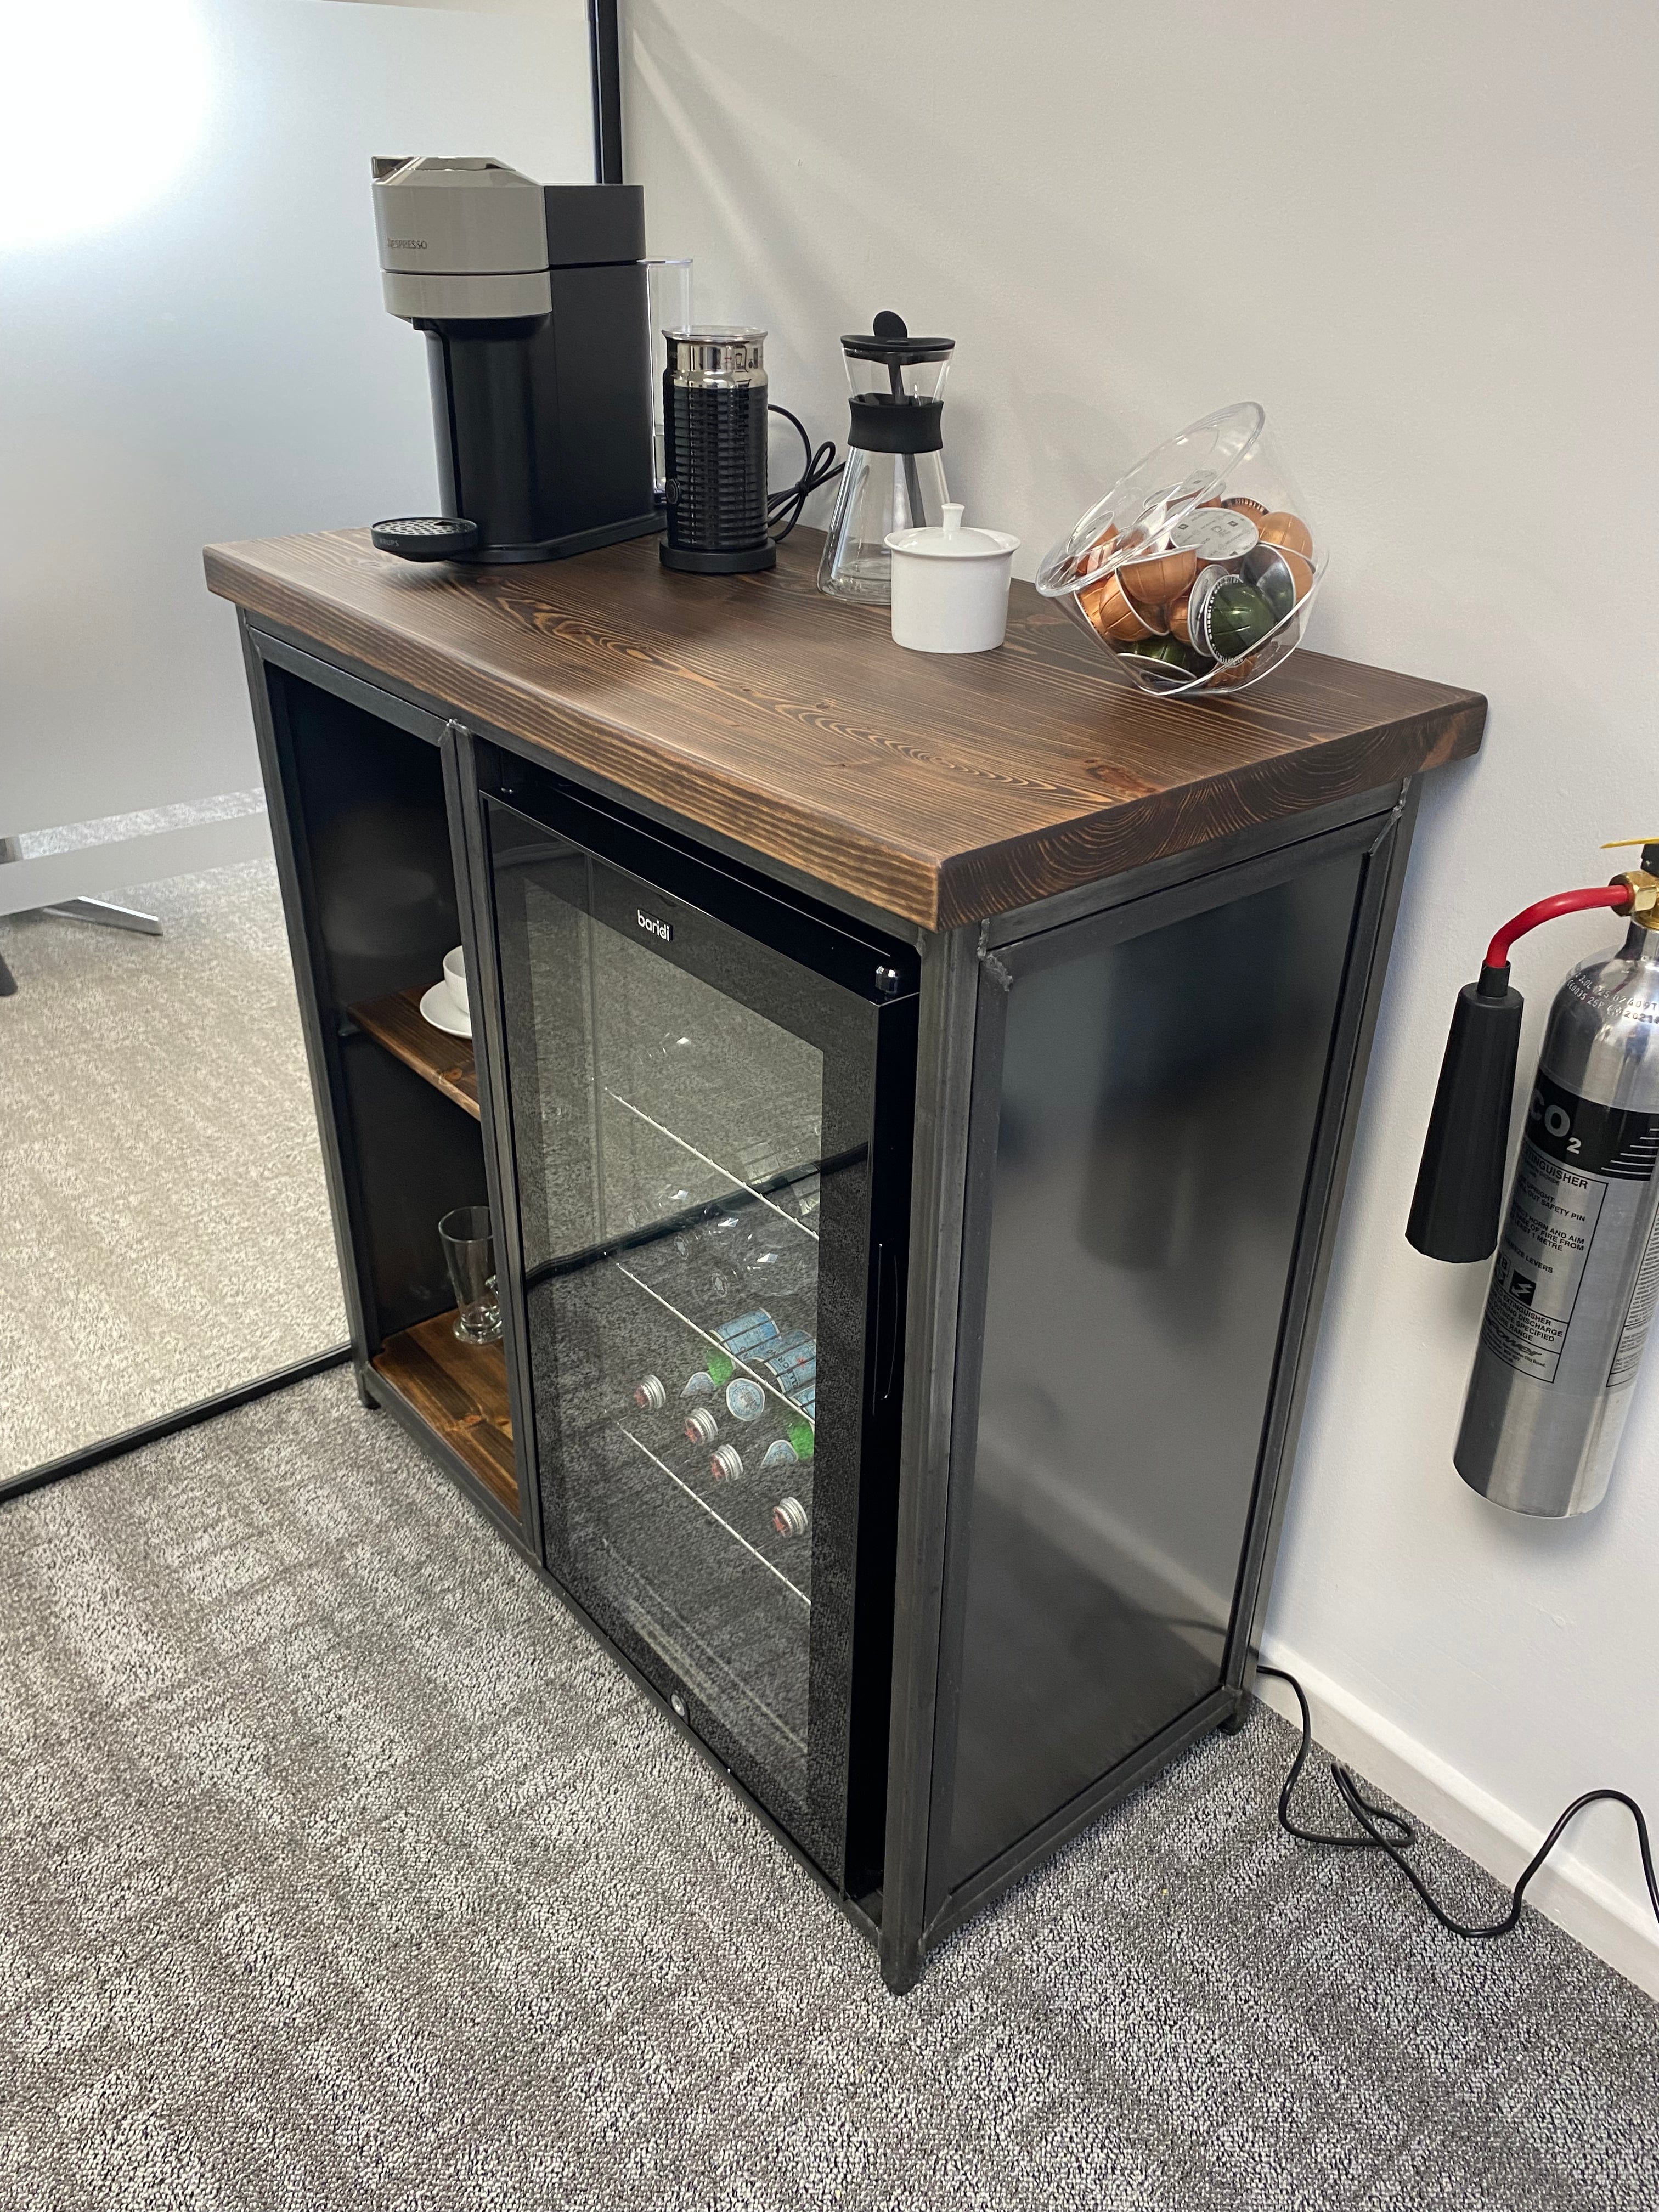 Modern Industrial Coffee Station Cabinet  RSD Furniture   